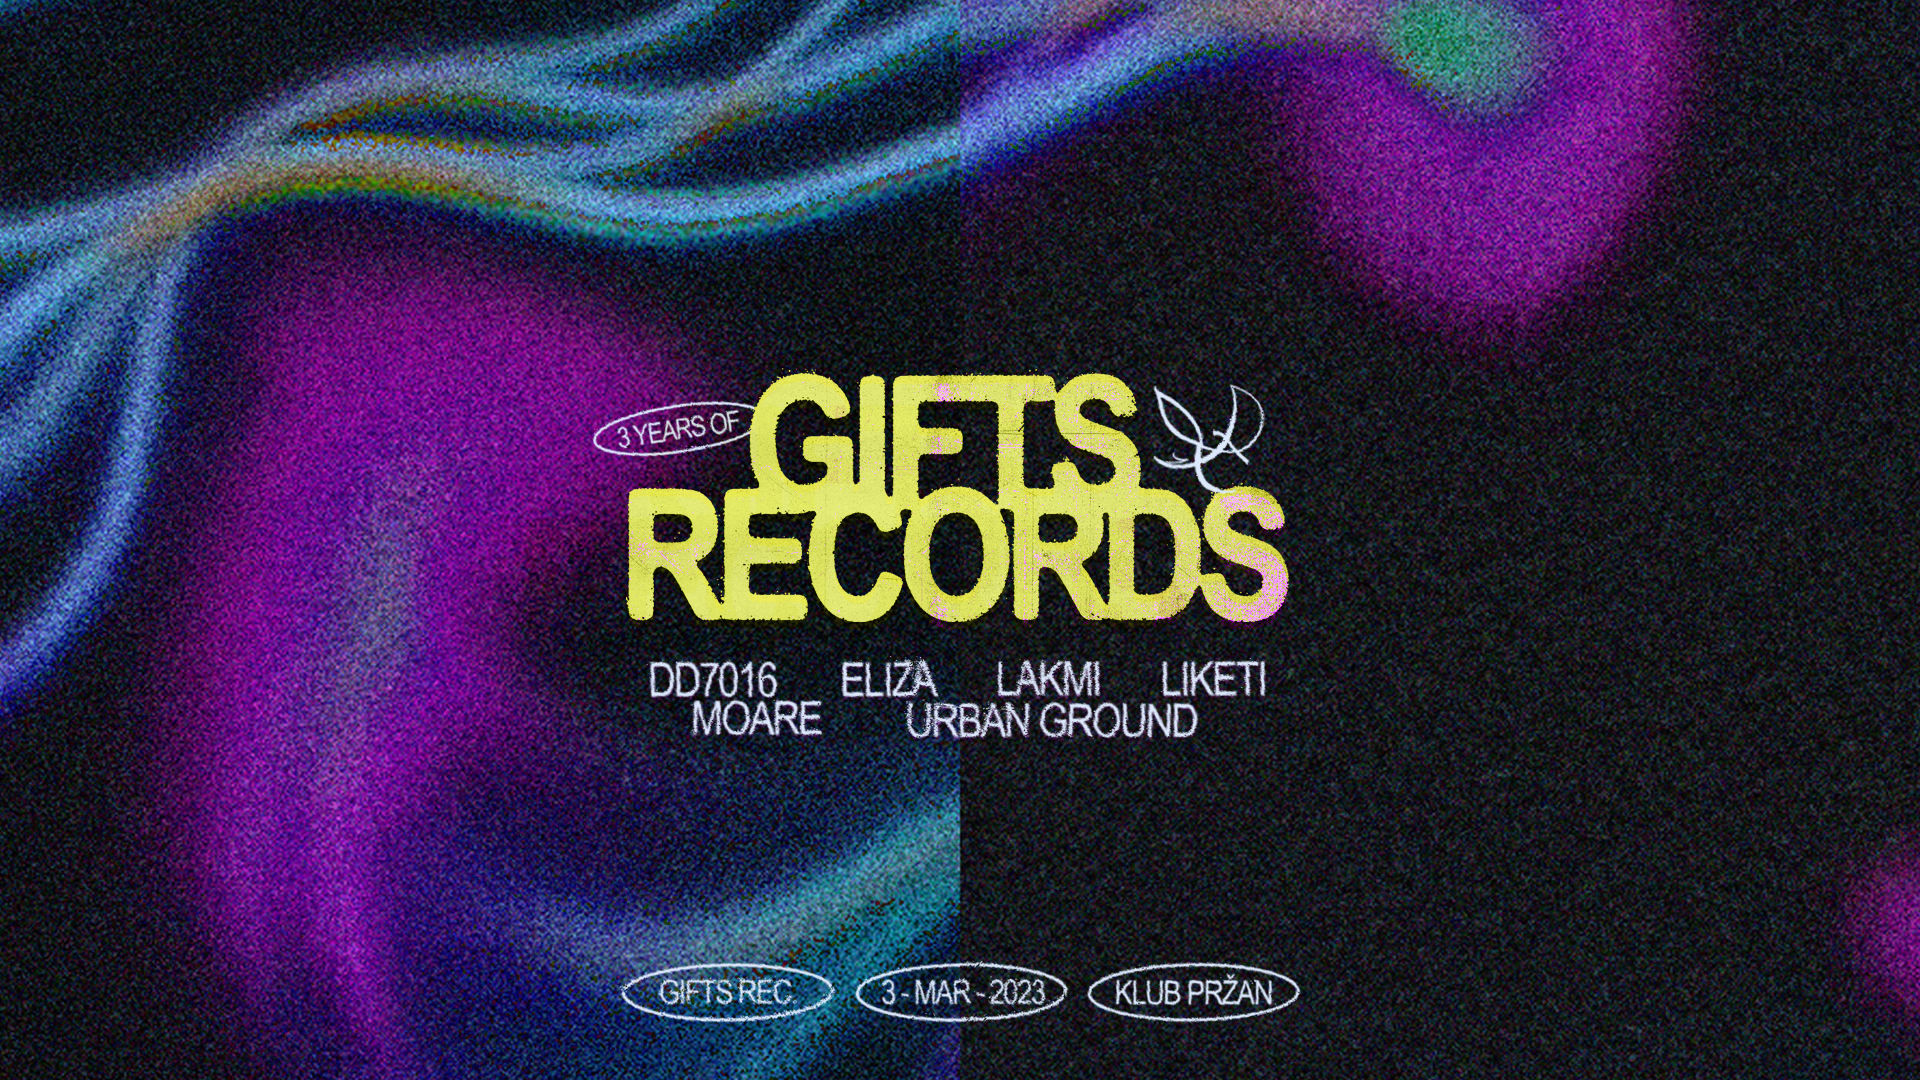 3 years of Gifts Records - フライヤー裏